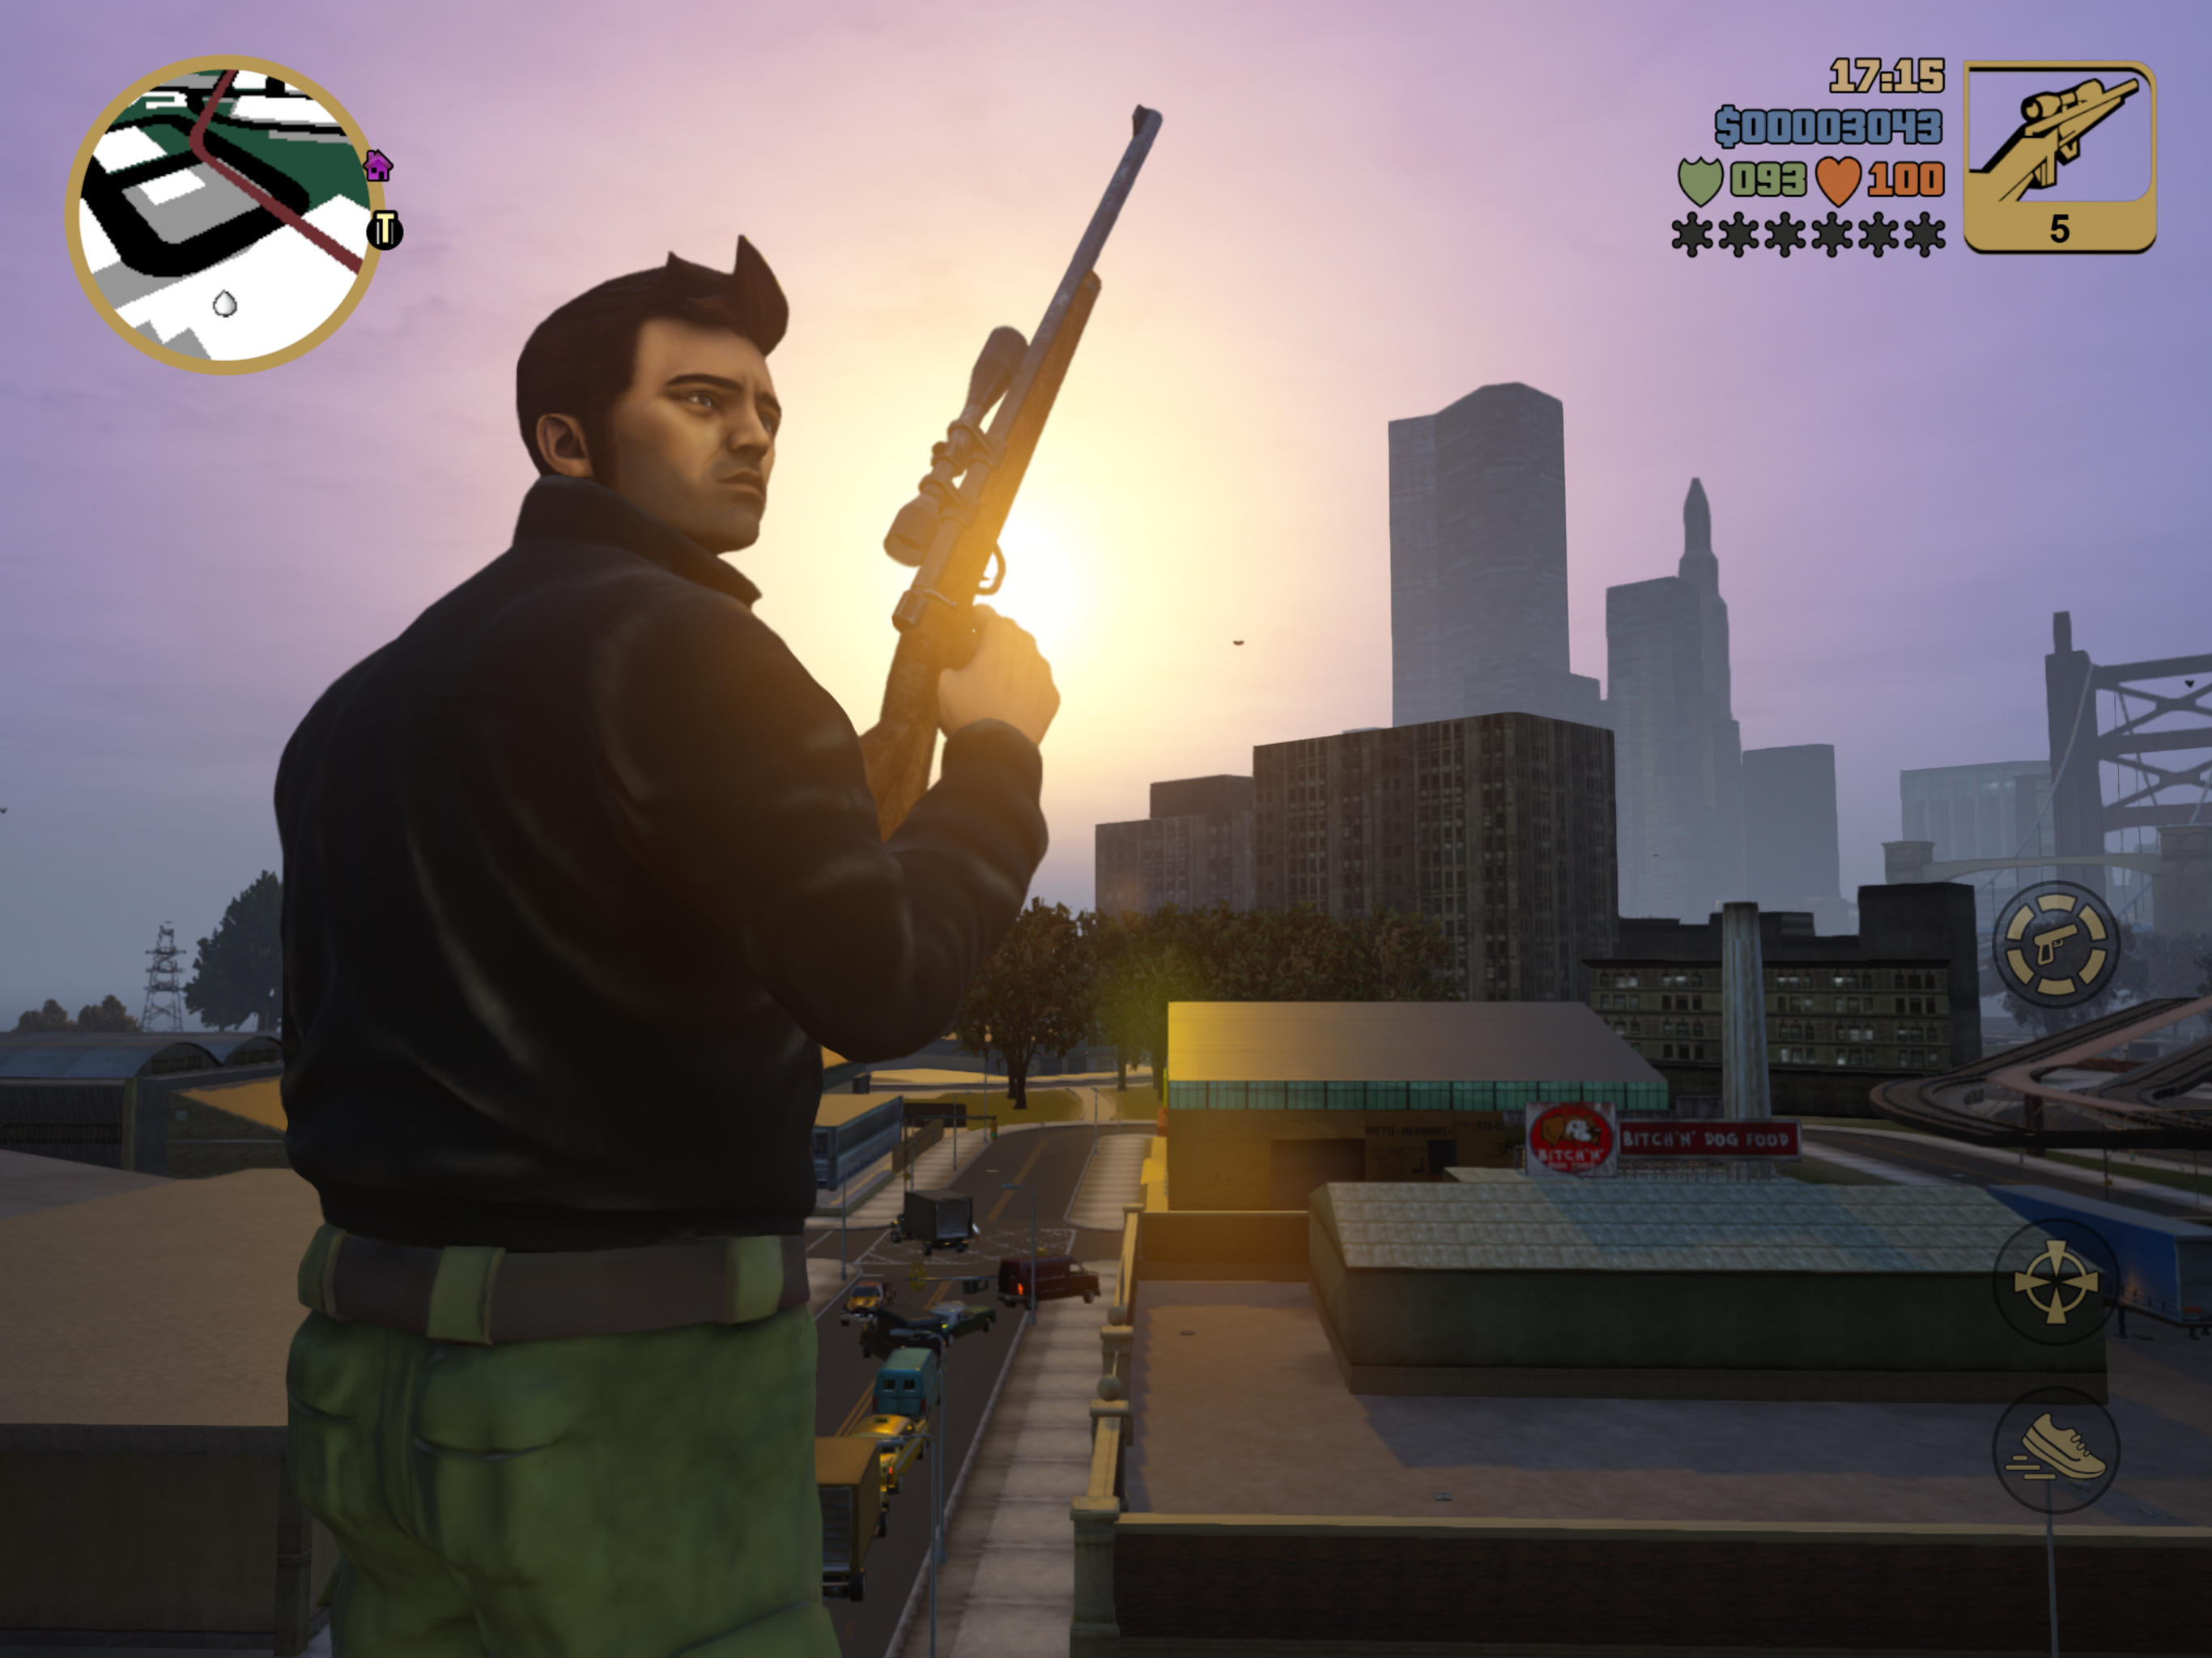 GTA lll Free Download Gameplay Walkthrough [Android/iOS] - Part 1 